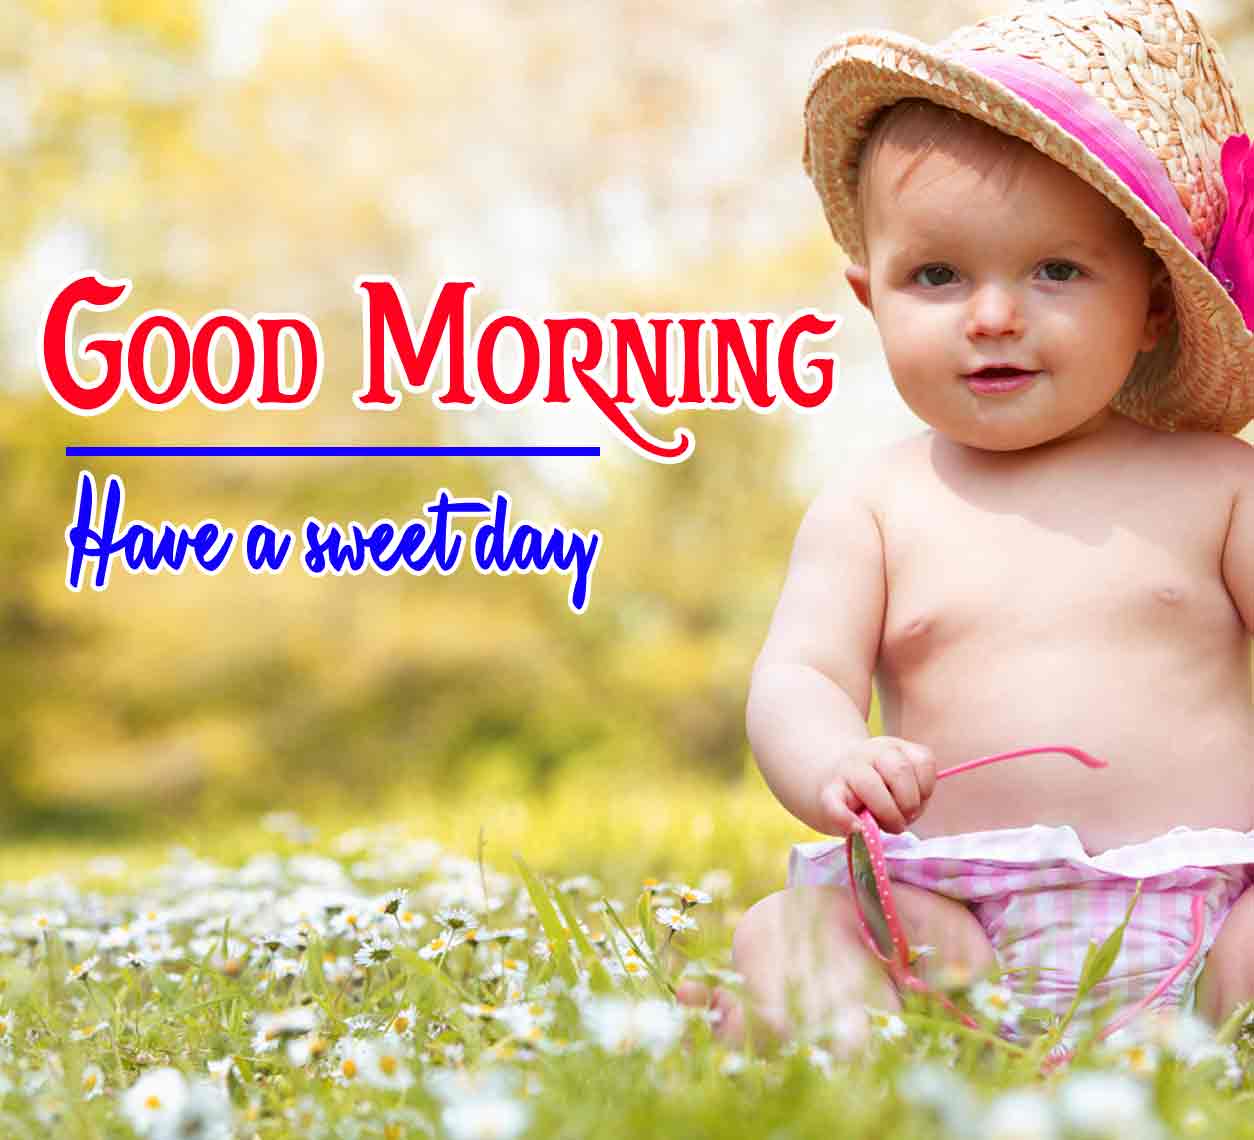 Good Morning 4k HD Images HD Pics pictures Download 